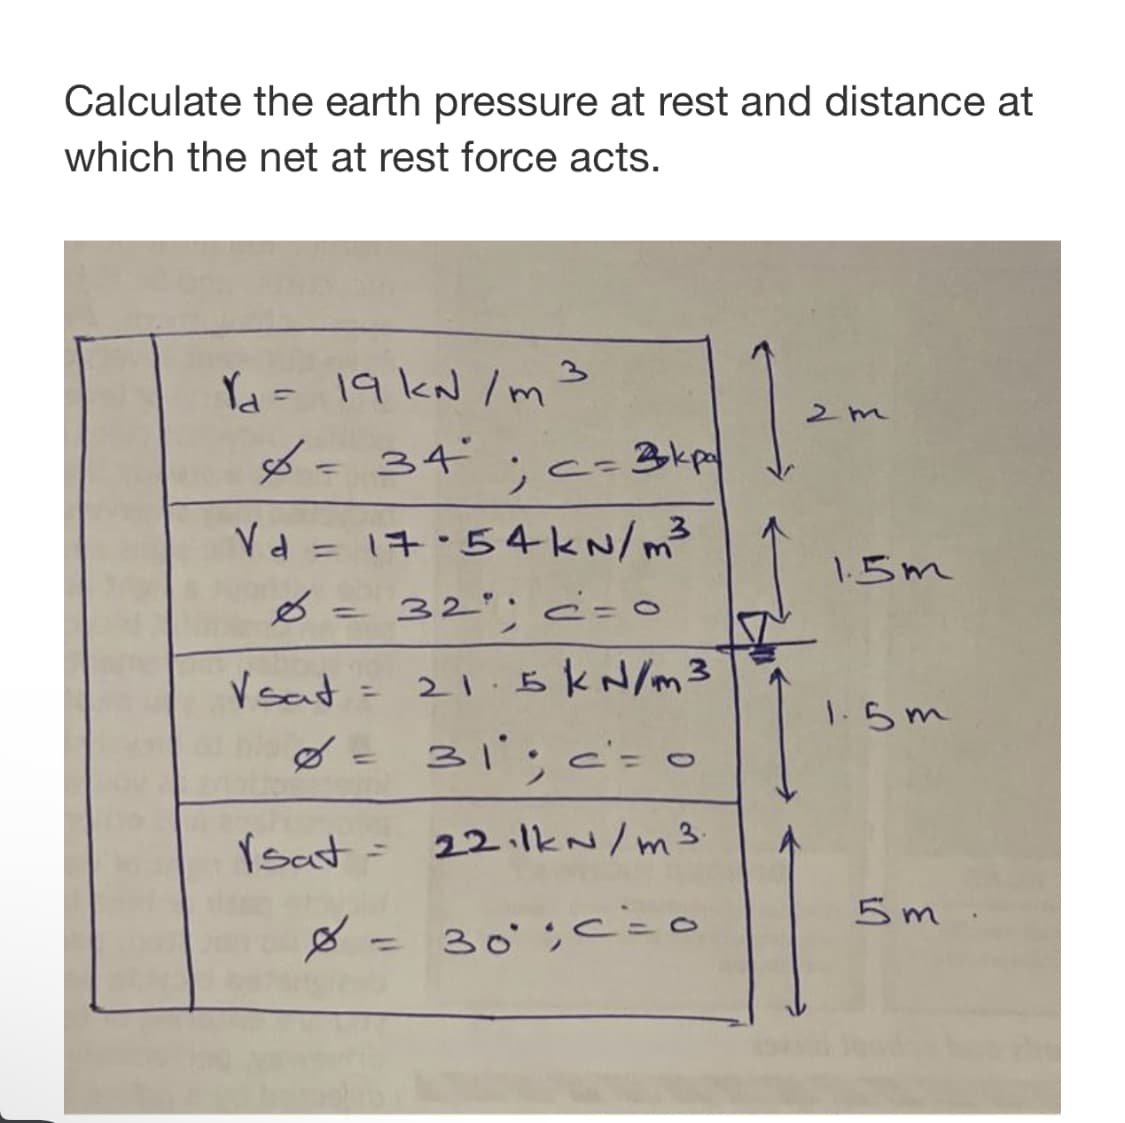 Calculate the earth pressure at rest and distance at
which the net at rest force acts.
3
Ya = 19 kN /m
2m
8=34 ;c=3kp
Vd = 17.54KN/m3
%3D
1.5m
32":c=o
Vsat
21.5kN/m 3
%3D
1らm
Ø=31'; c= o
rsat=
22.1kN/m3
5m.
